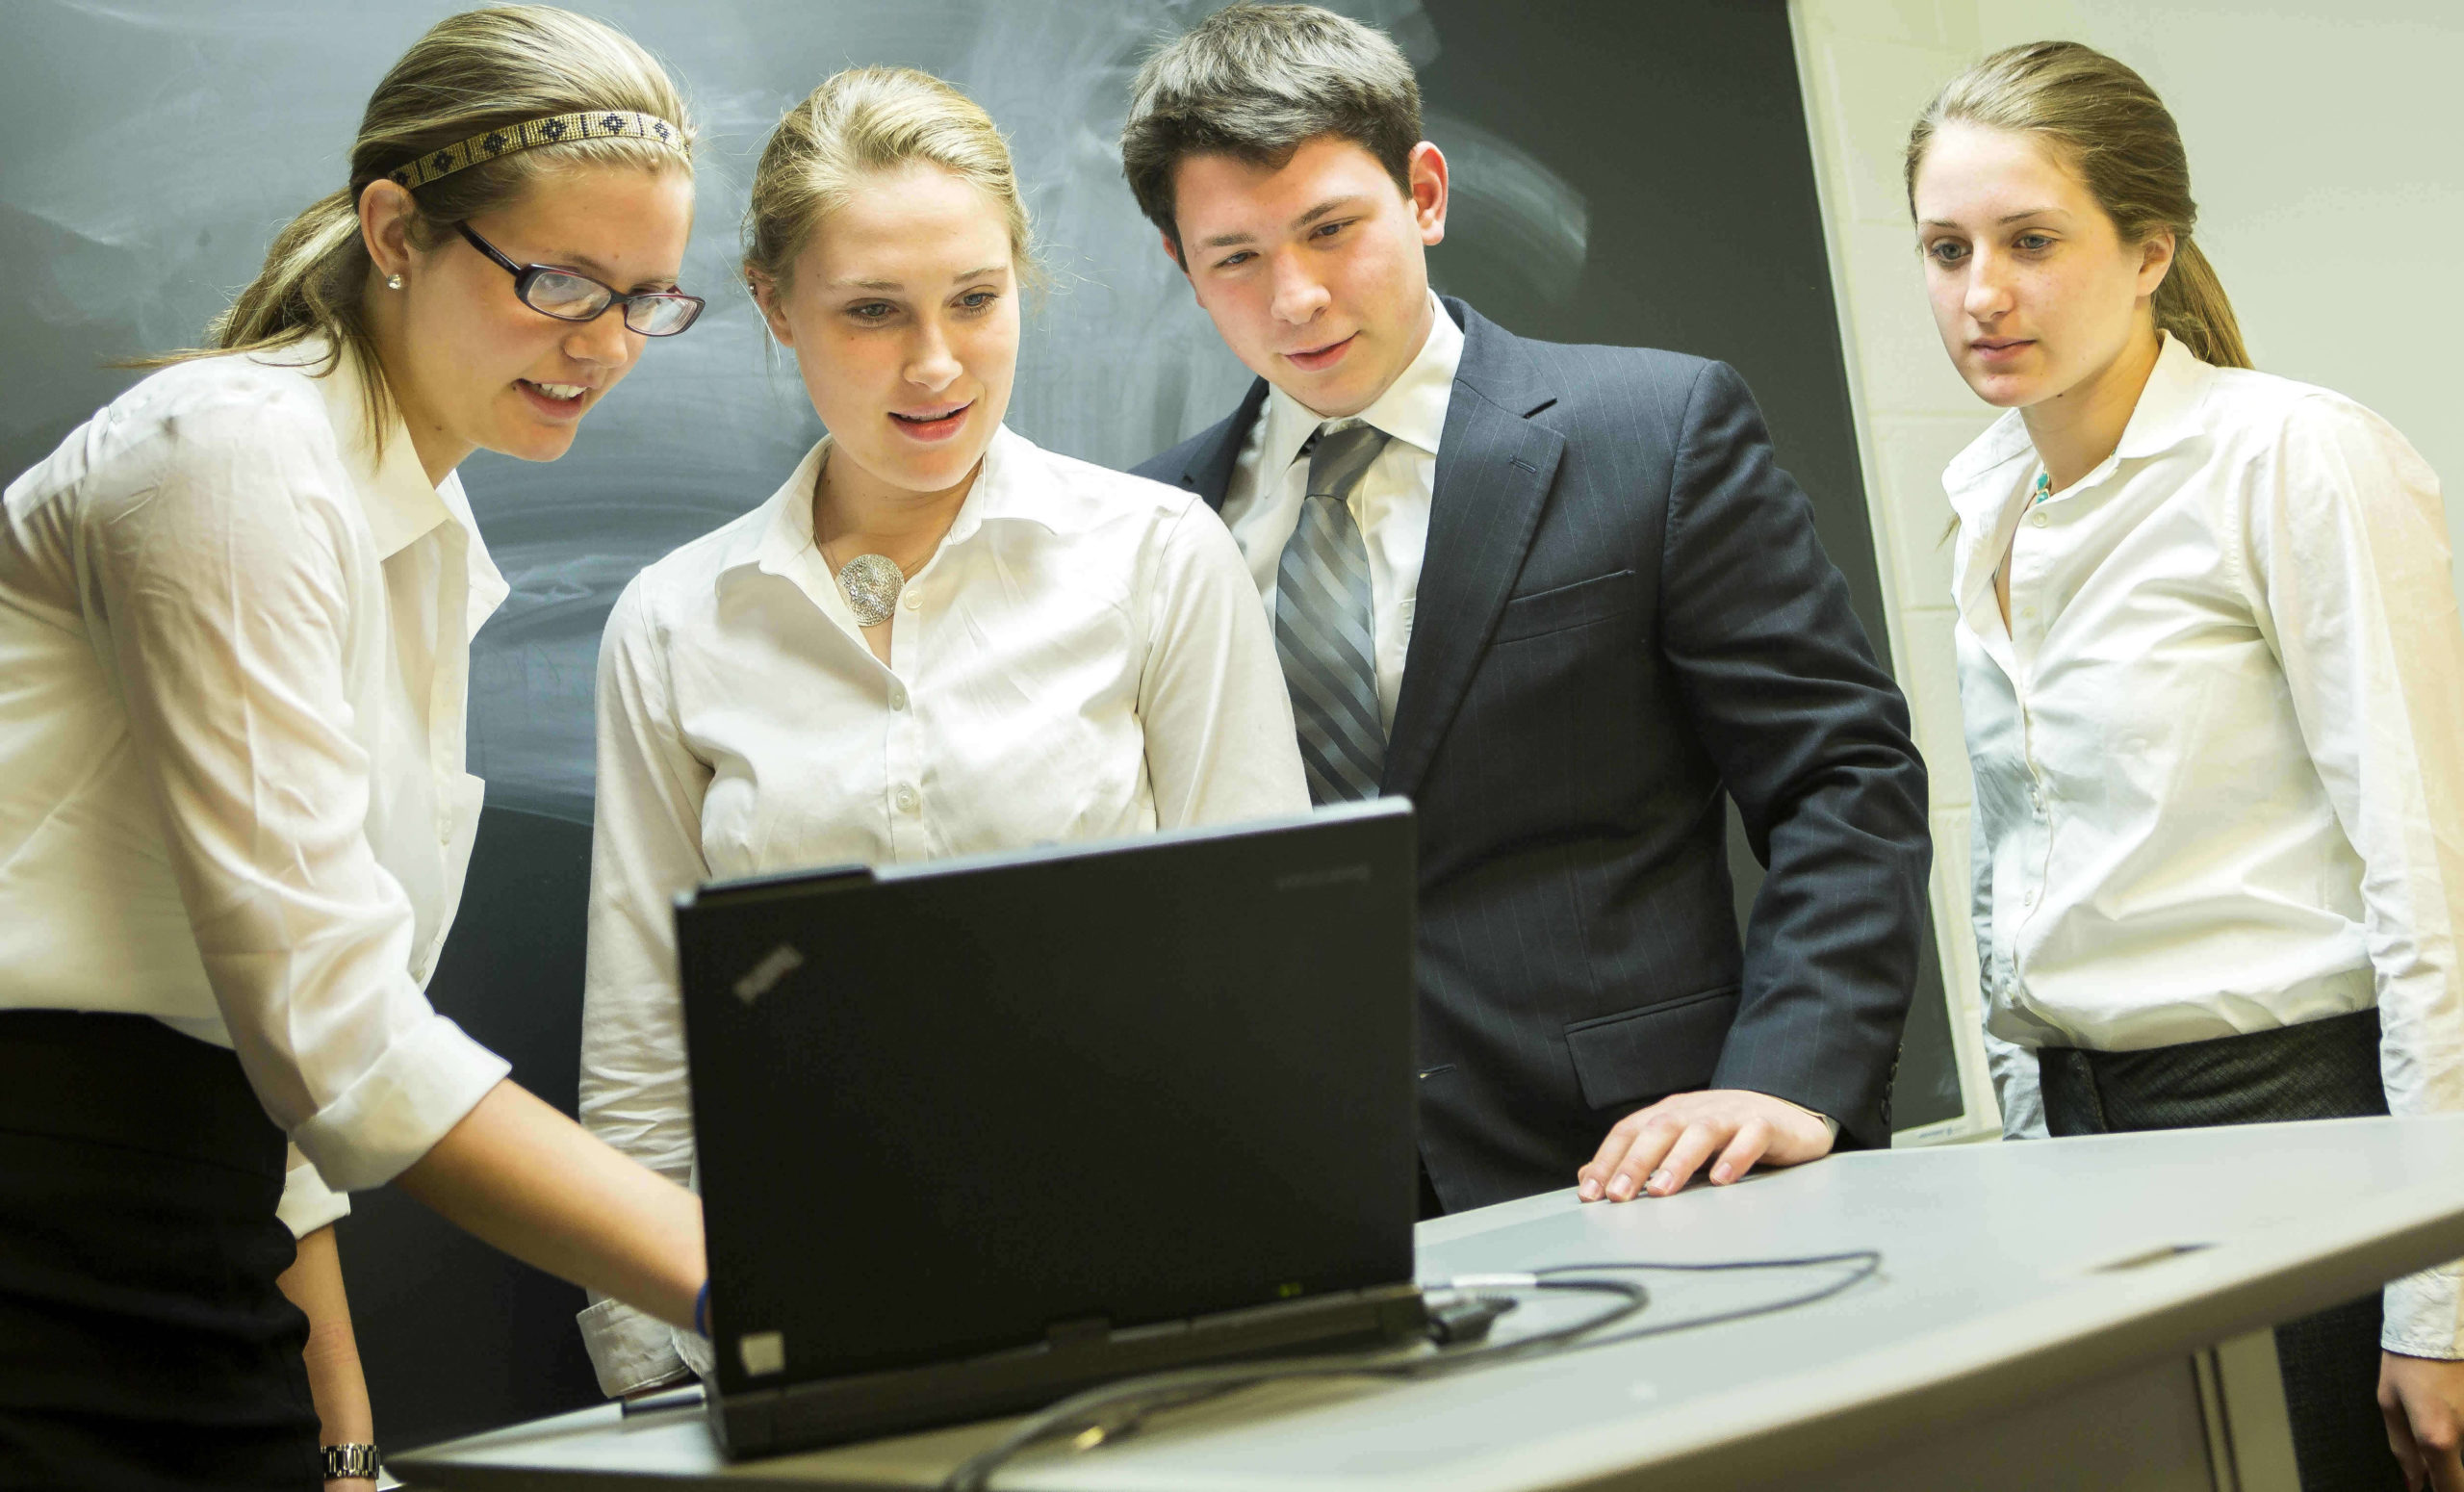 Professionally-dressed students gathered around a laptop